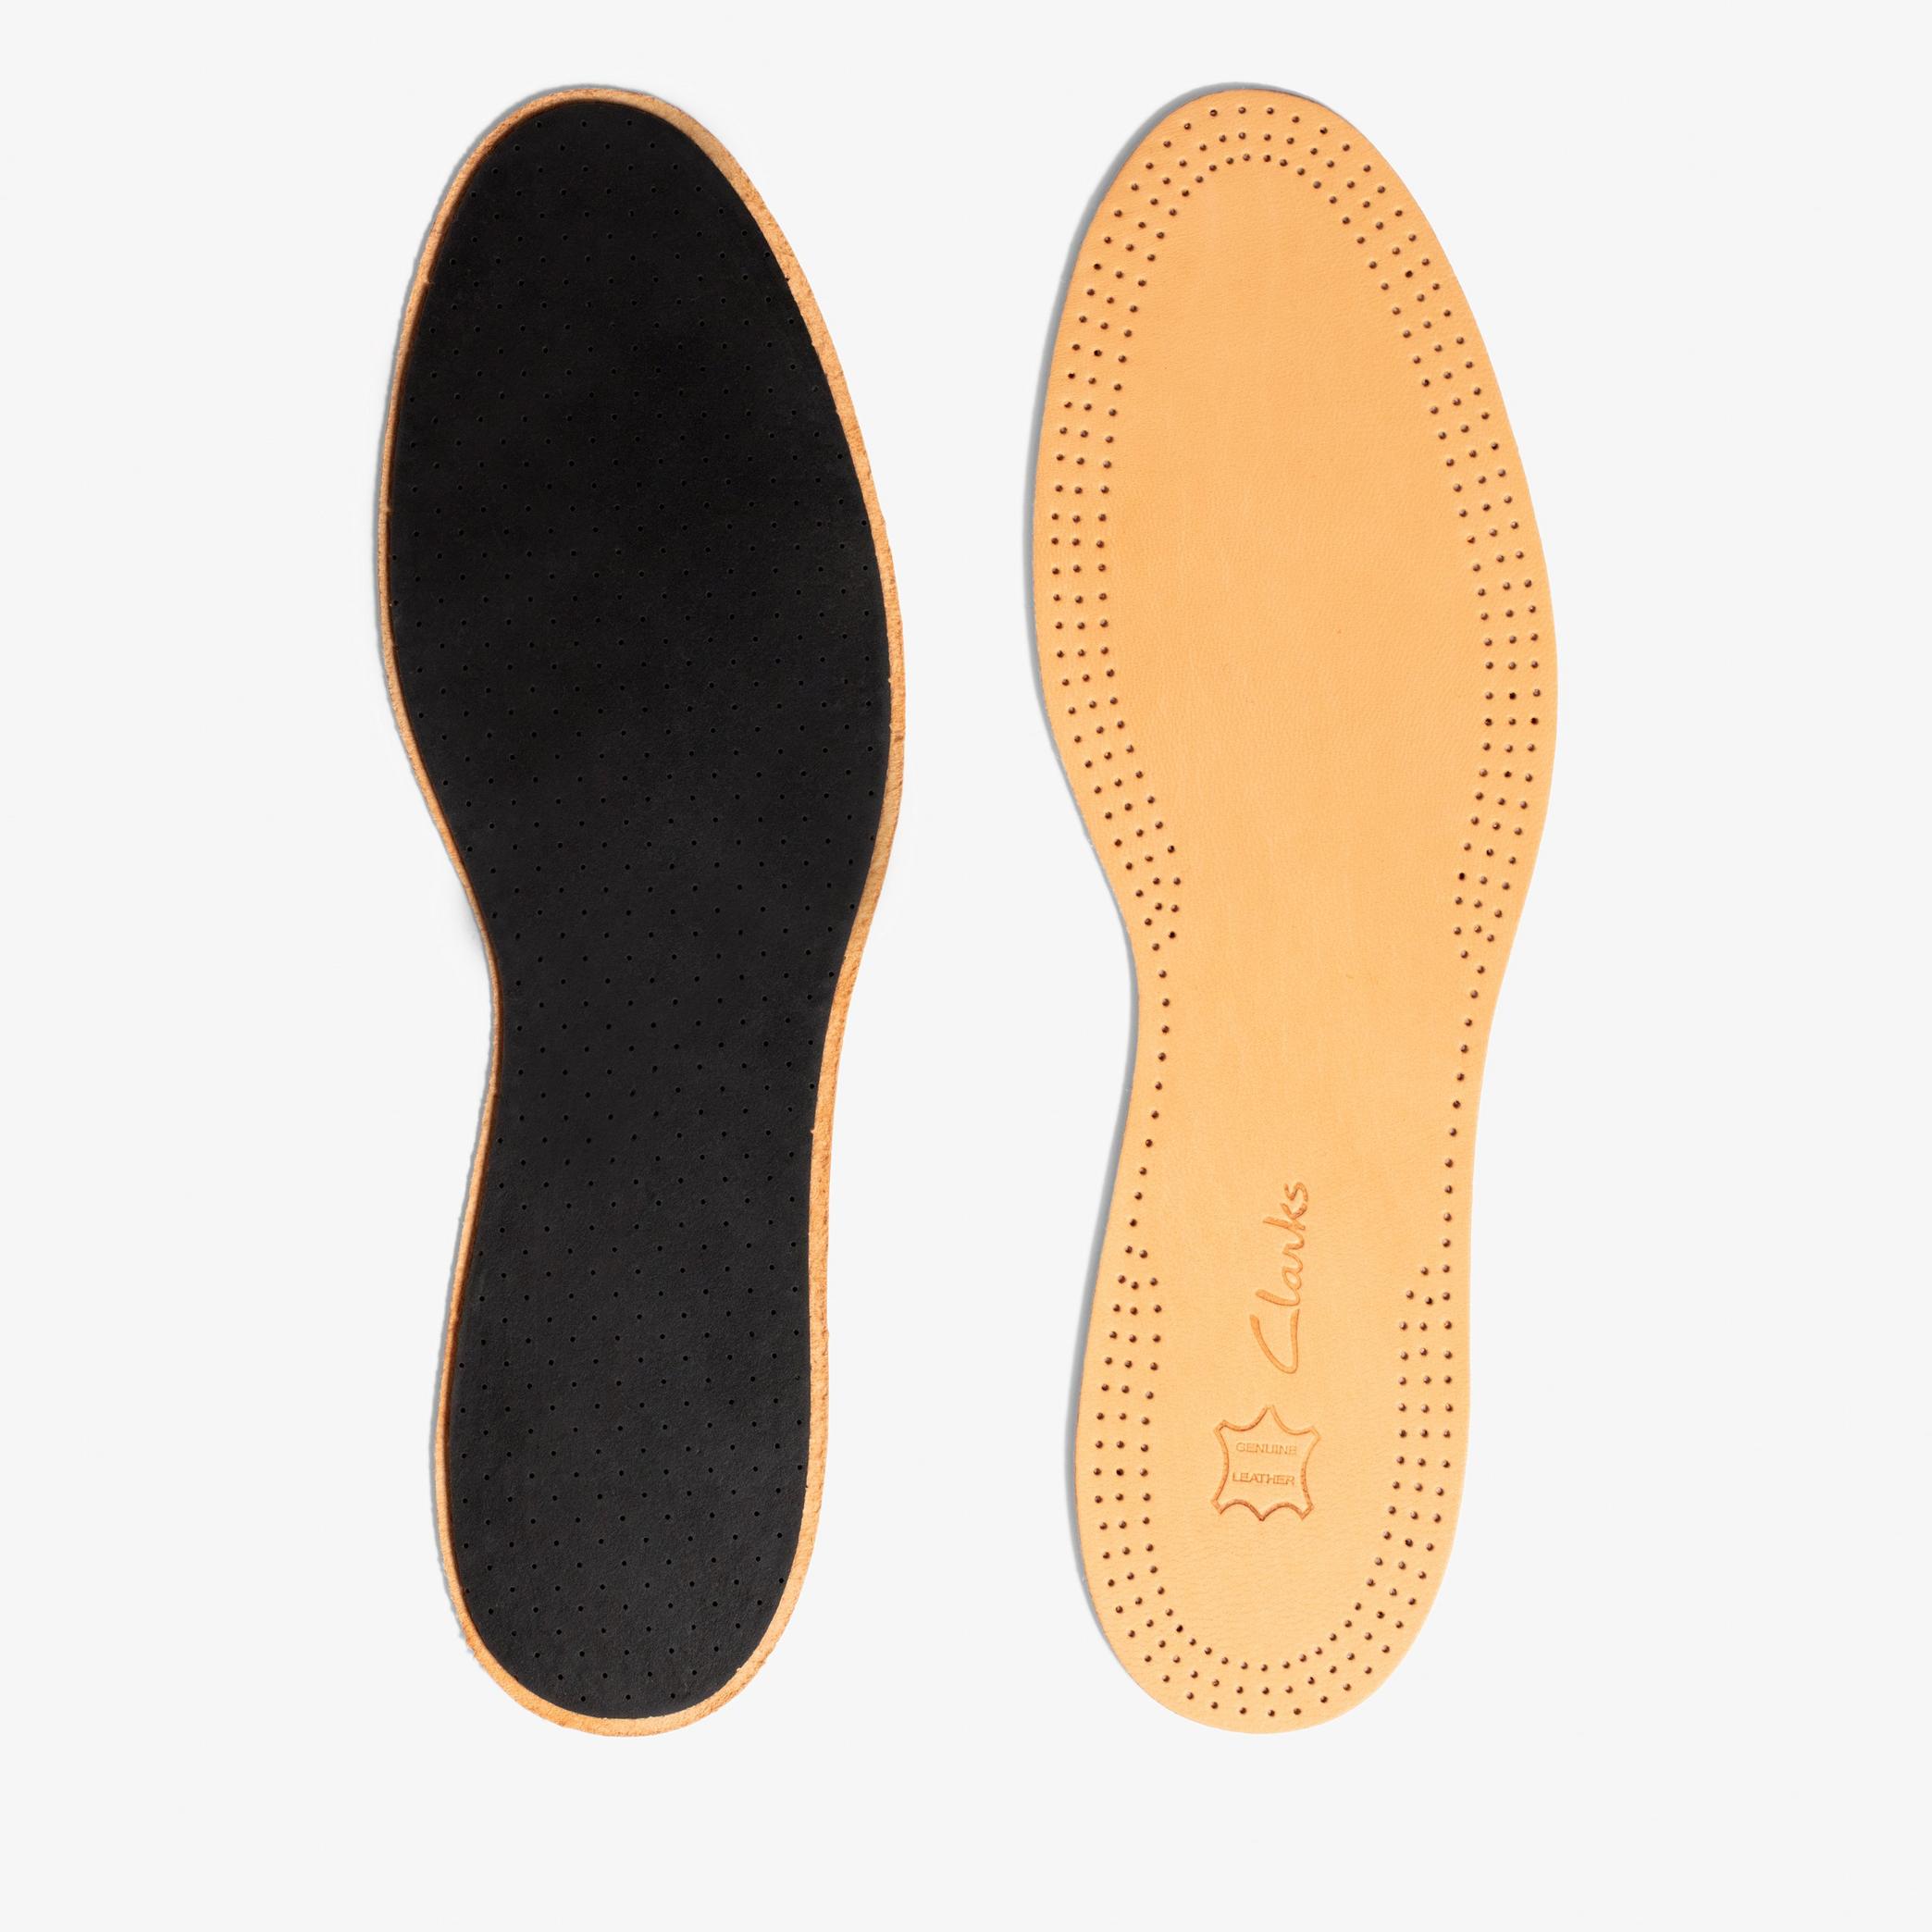 Leather insole size 9  Insoles, view 2 of 3